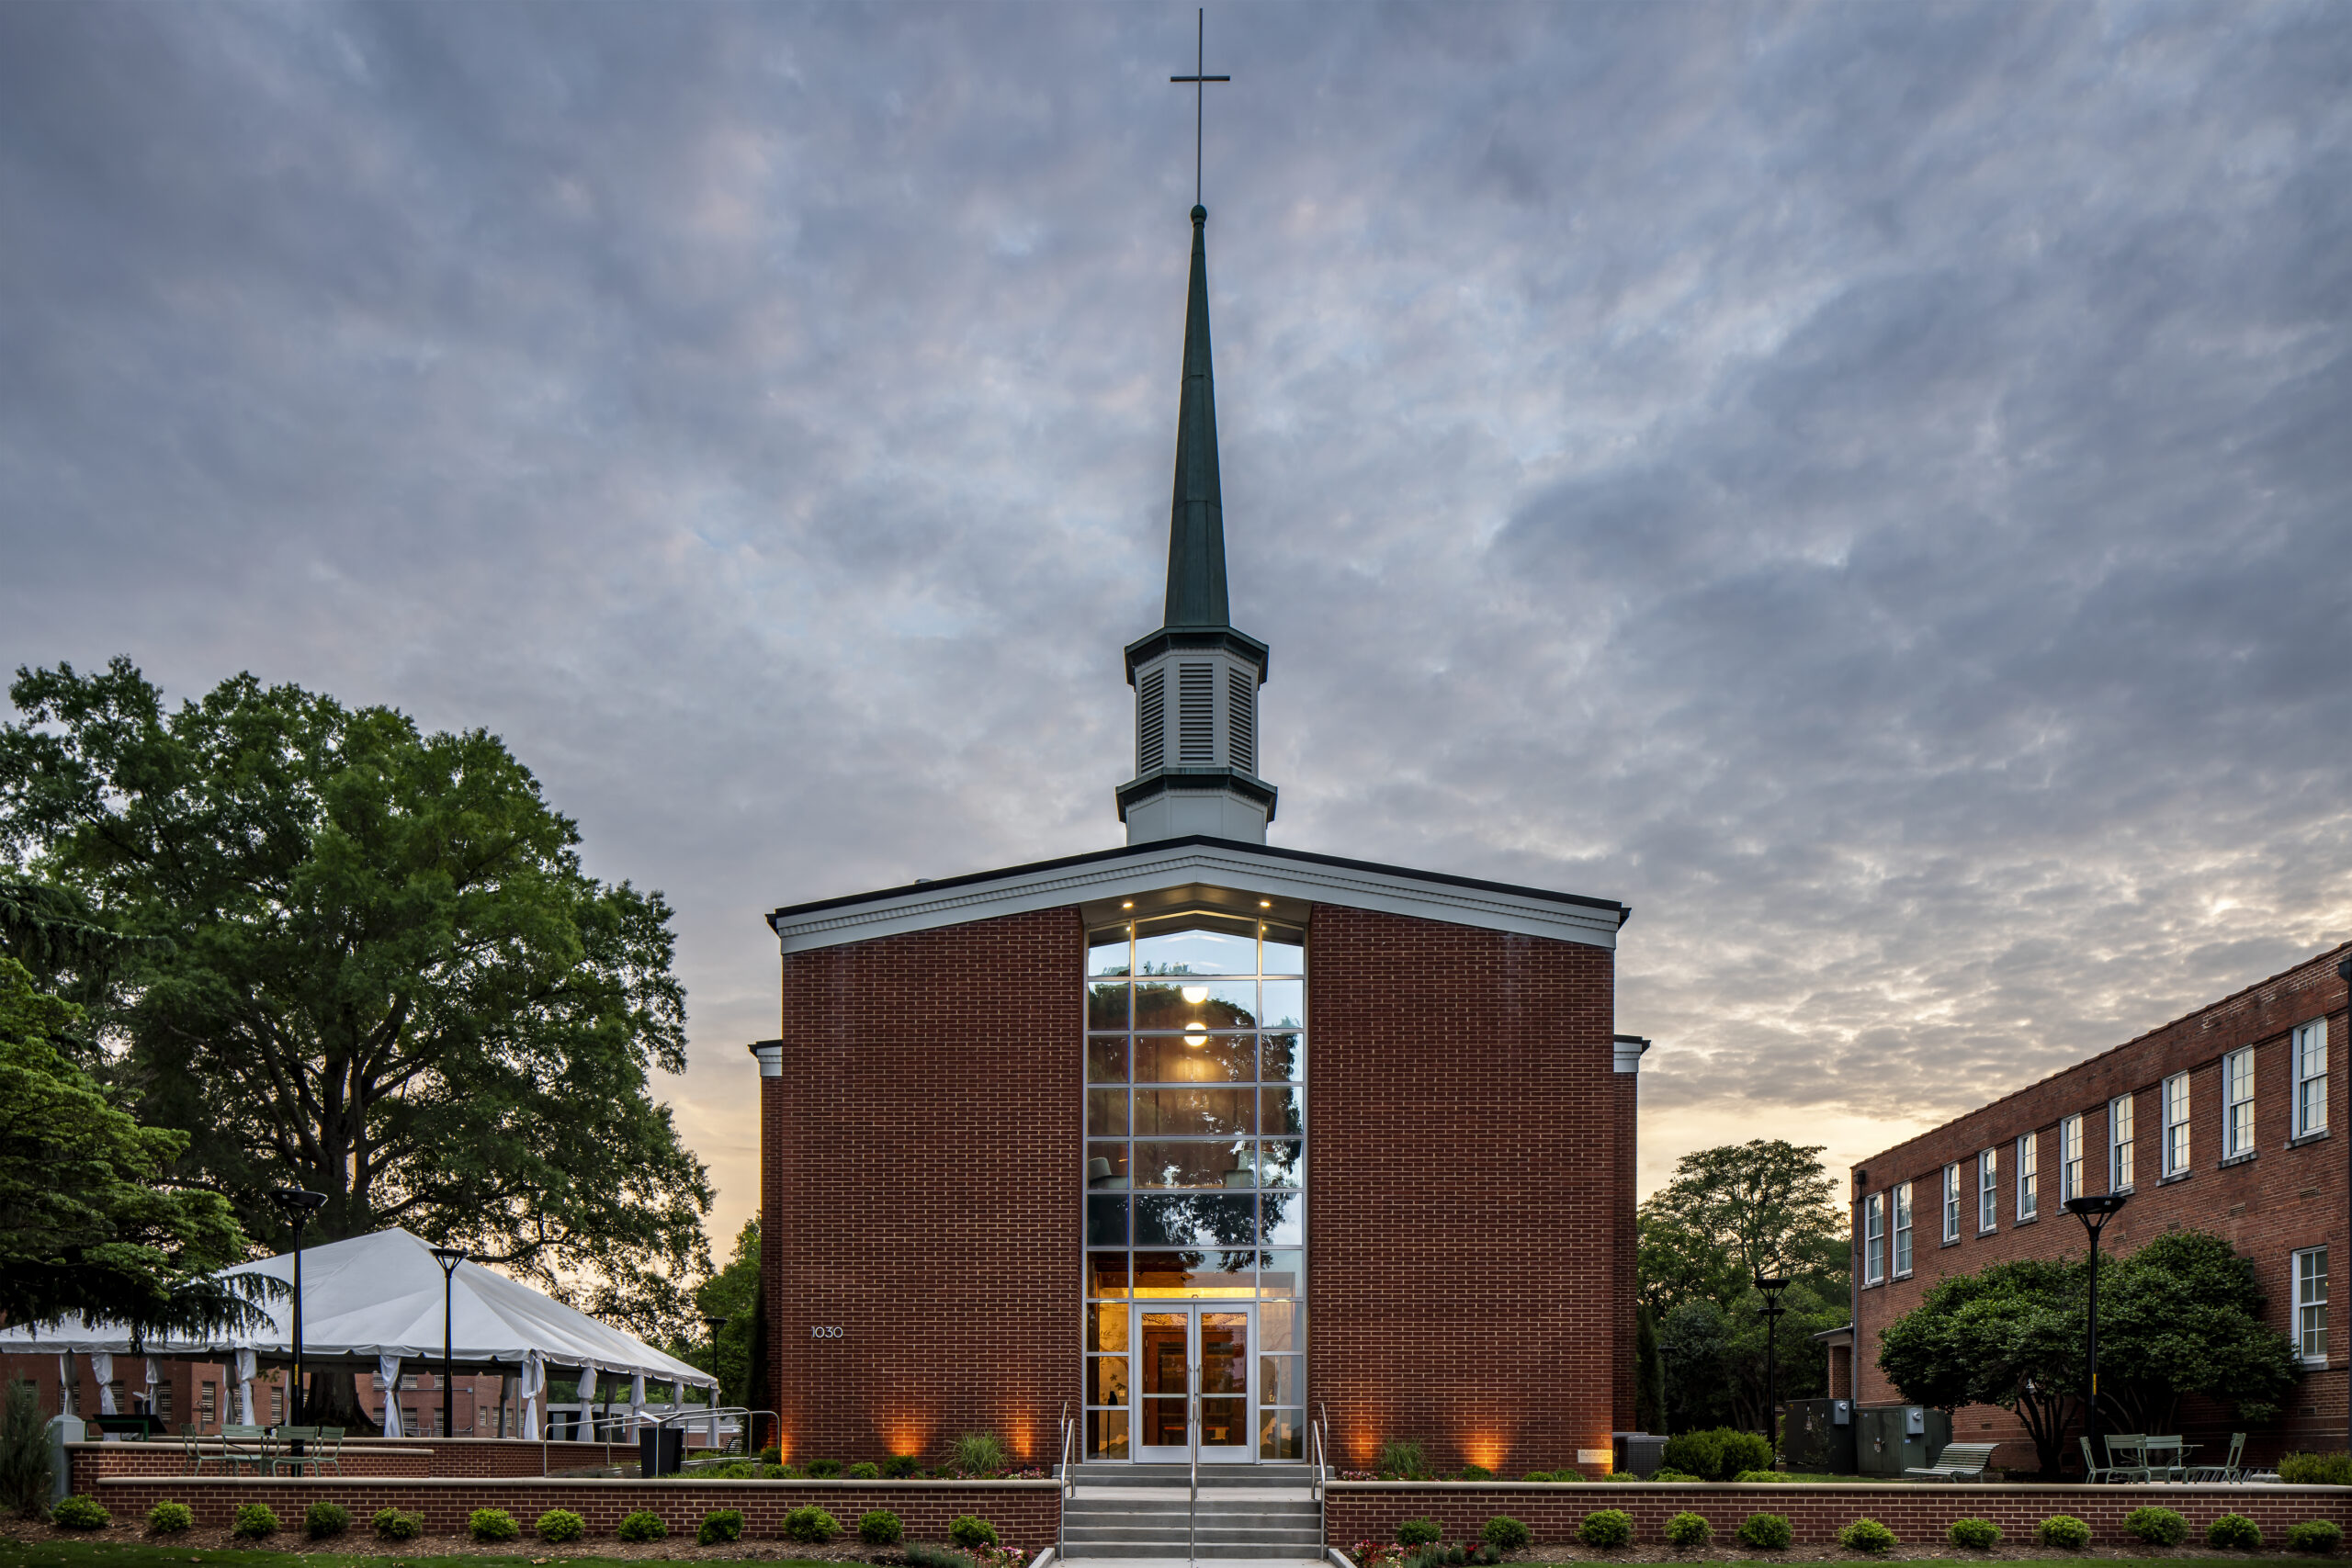 Greg Poole, Jr. All Faiths Chapel Front Exterior at Dusk with Lights